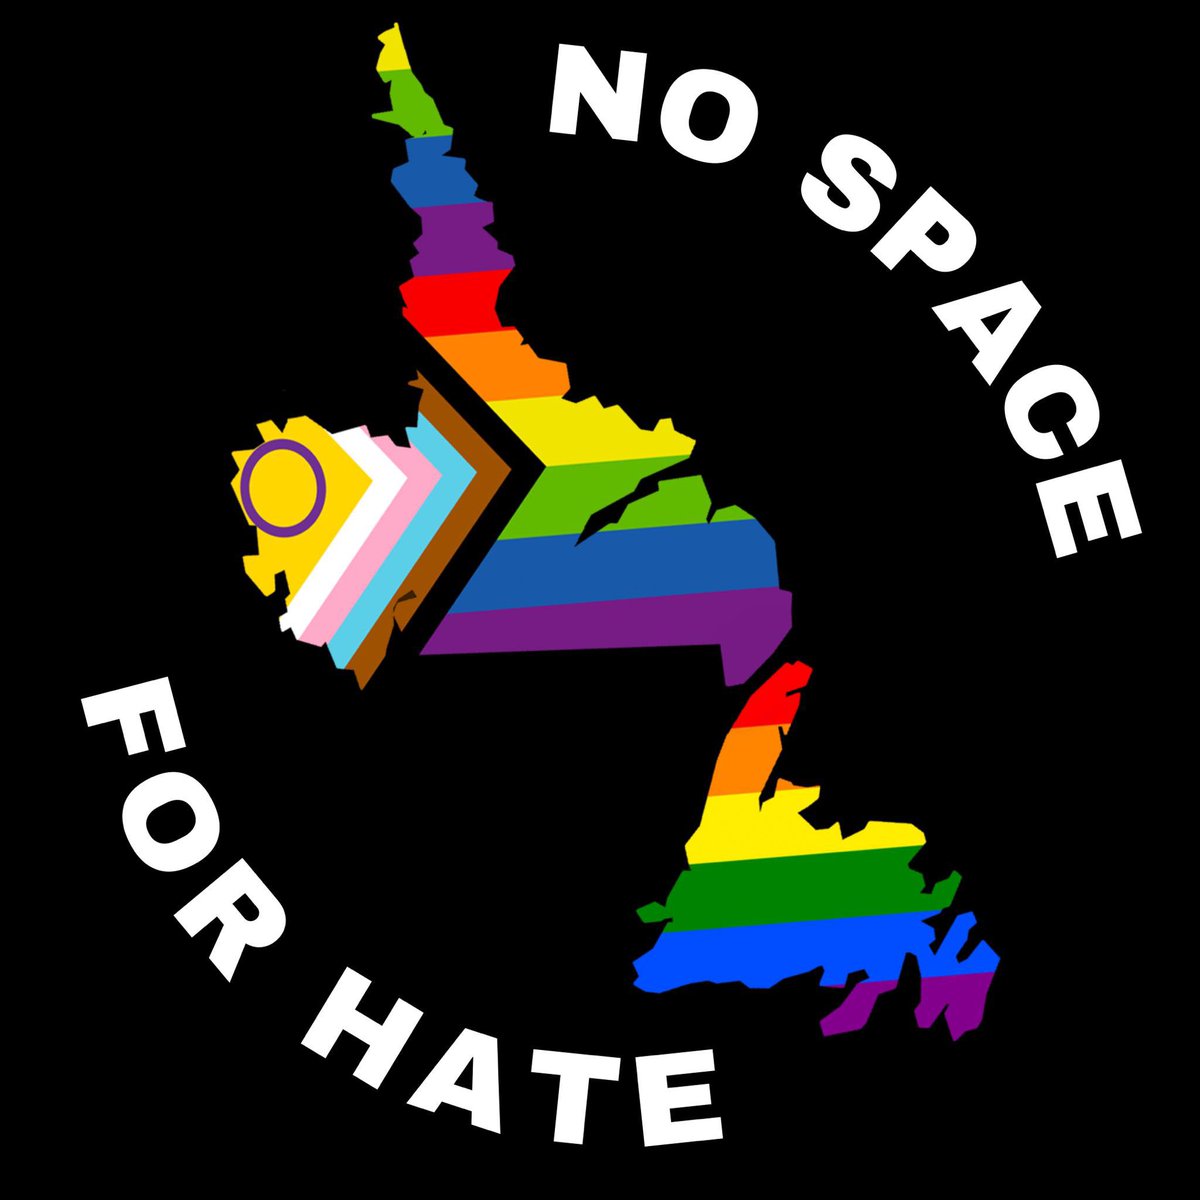 In a province that is known for being hospitable and kind, there is definitely no space for hate. Love is love and people should always be able to be themselves and express themselves how they want. In the end love wins. Happy Pride 🏳️‍🌈🏳️‍⚧️❤️